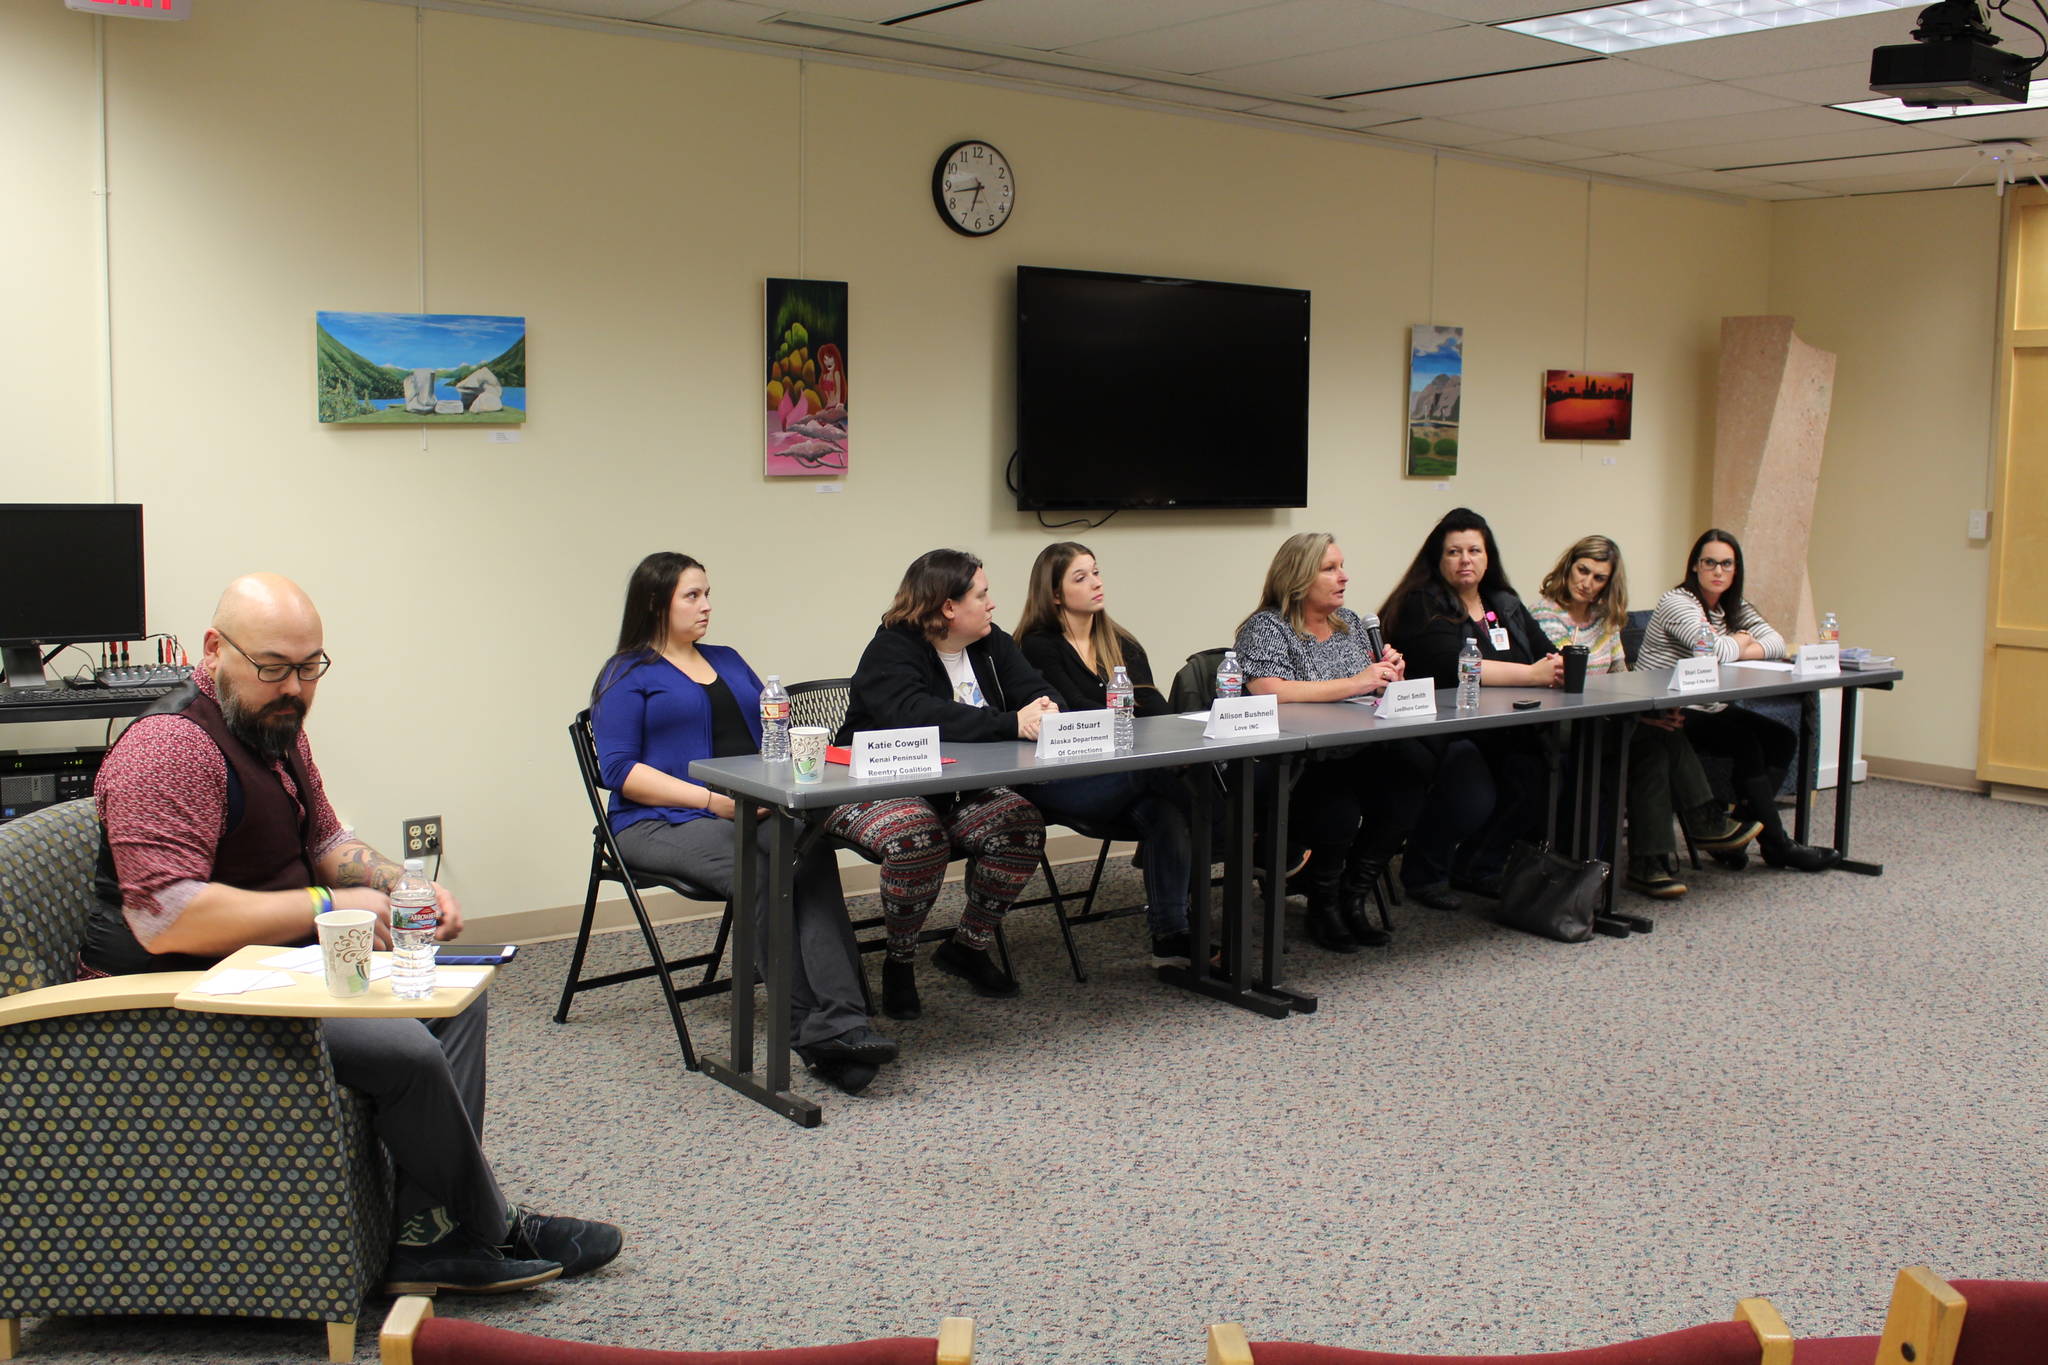 Representatives from local nonprofits and government agencies participate in a community panel on Restorative Reentry at the Kenai Peninsula College on Thursday. (Photo by Brian Mazurek)